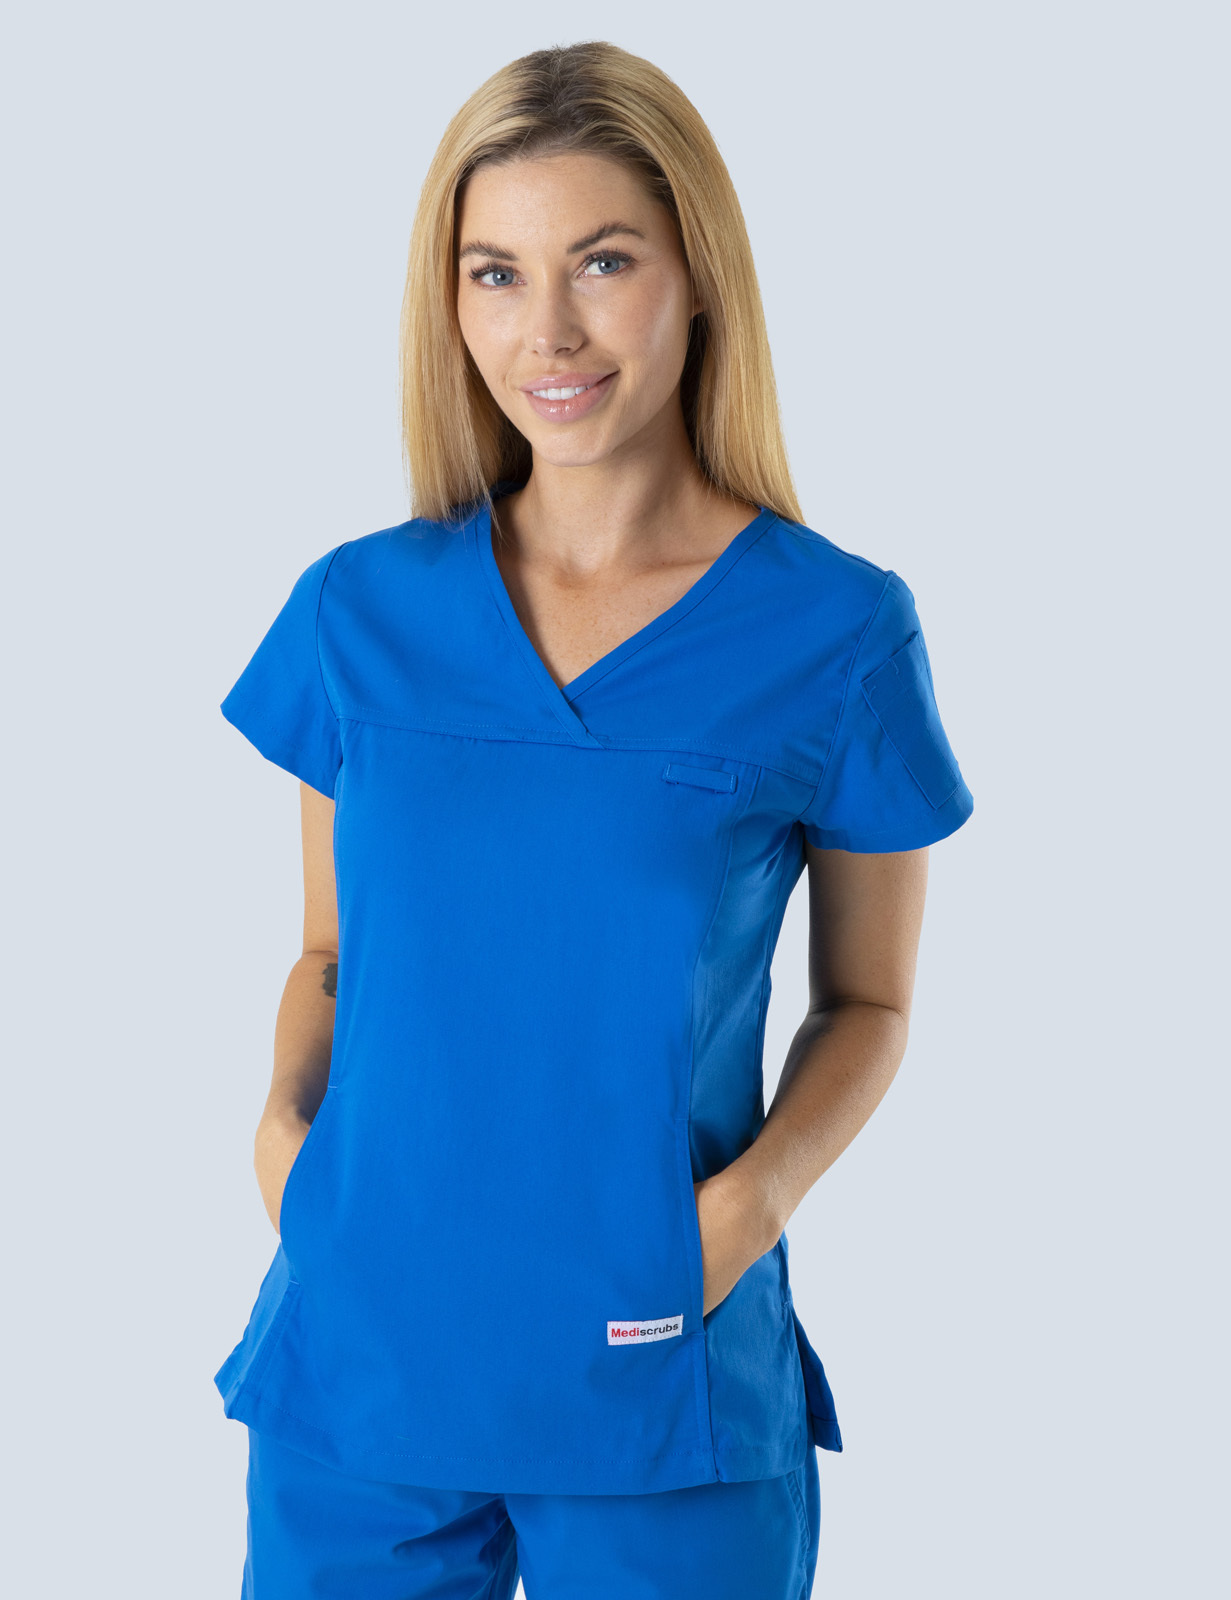 The Alfred Hospital Pathology Uniform Top Bundle (Women's Fit Solid Top in Royal incl Logo)